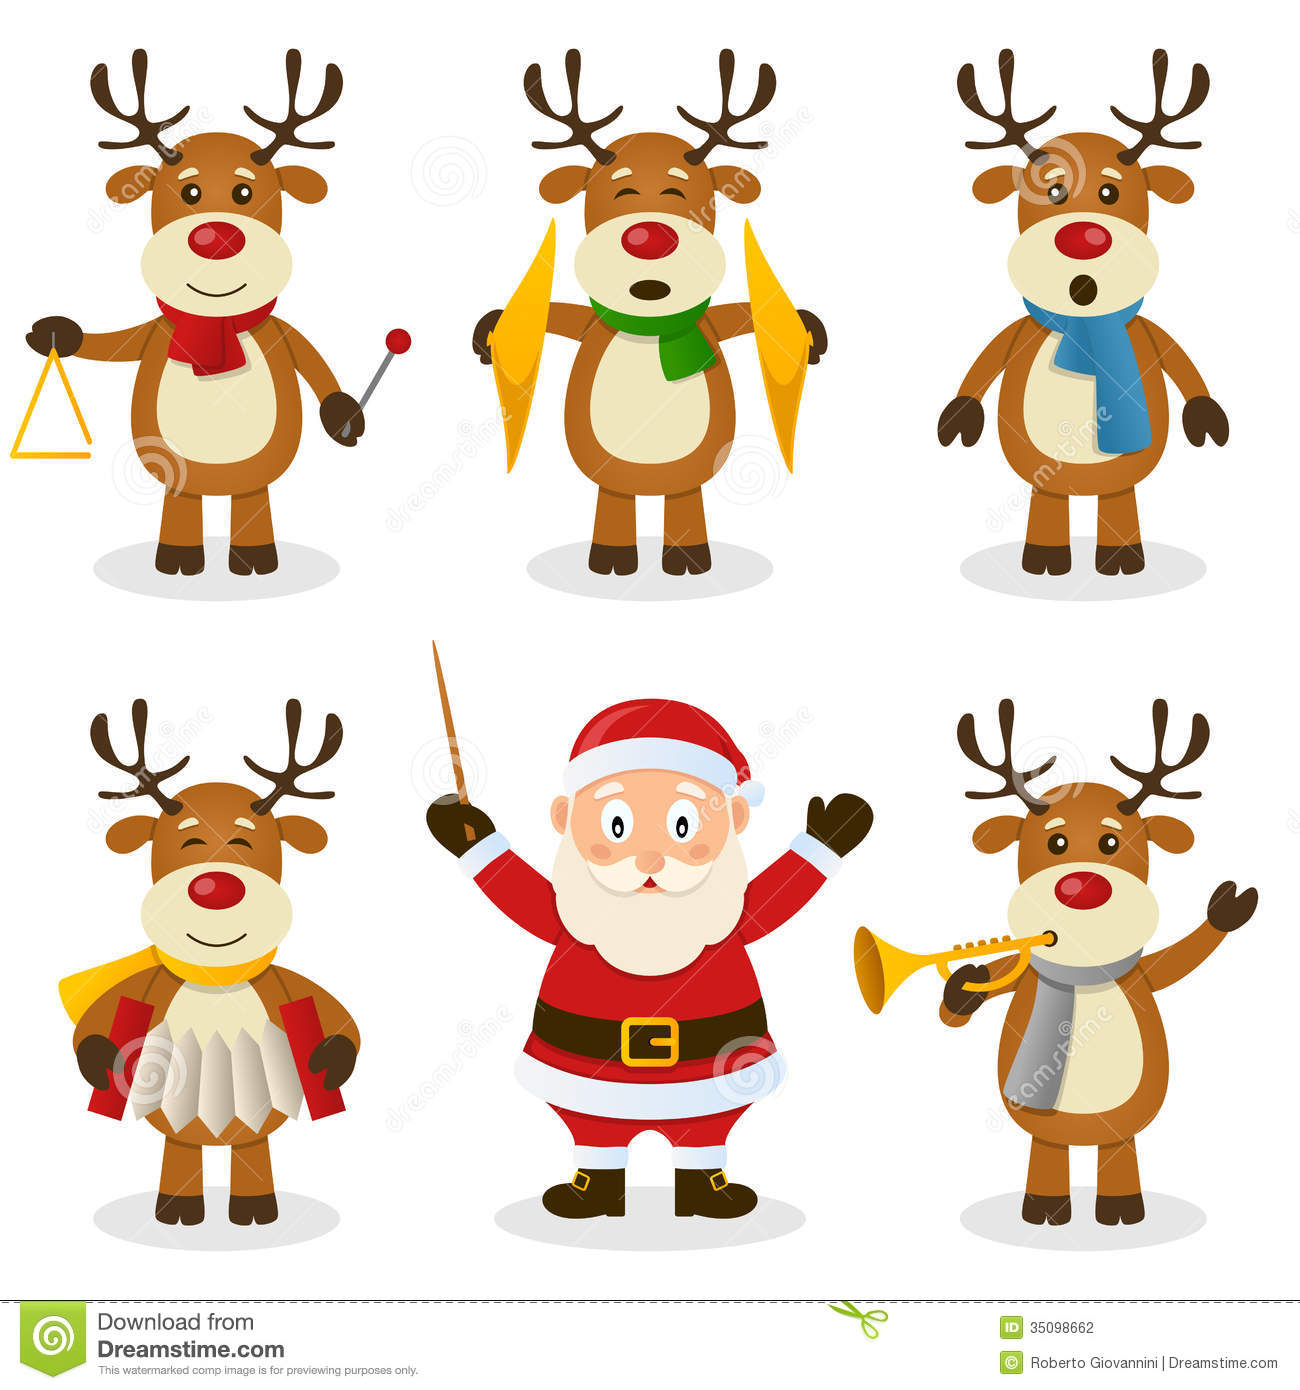 Funny Cartoon Christmas Orchestra With Five Cute Reindeer Characters